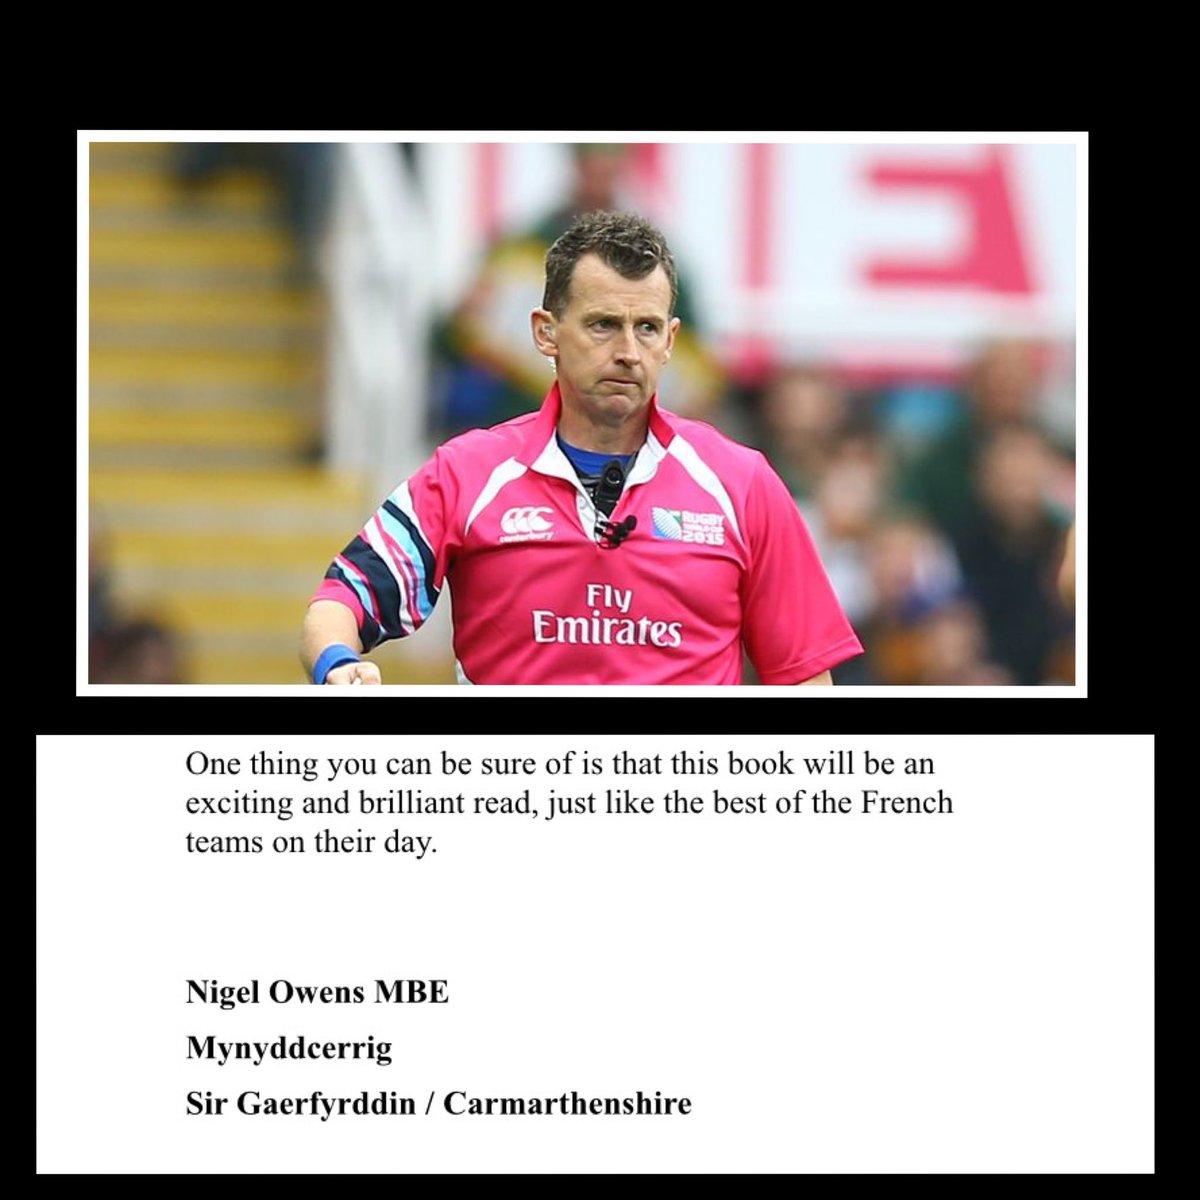 The Bleus Brothers published this summer with a foreword from my friend @Nigelrefowens